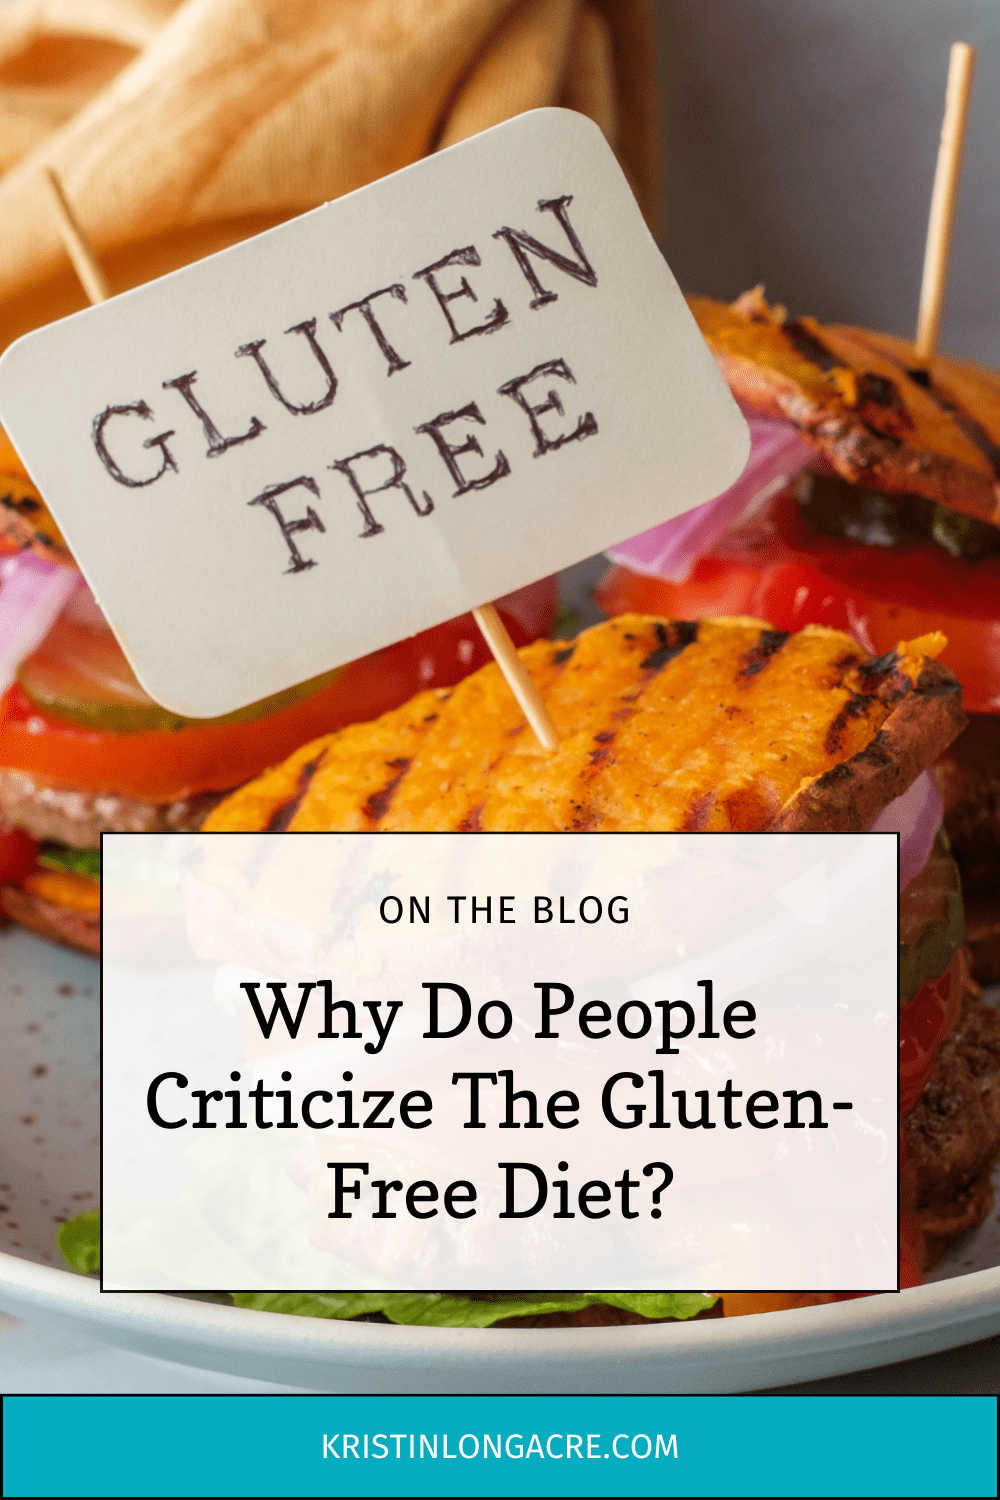 Why Do People Criticize The Gluten-Free Diet